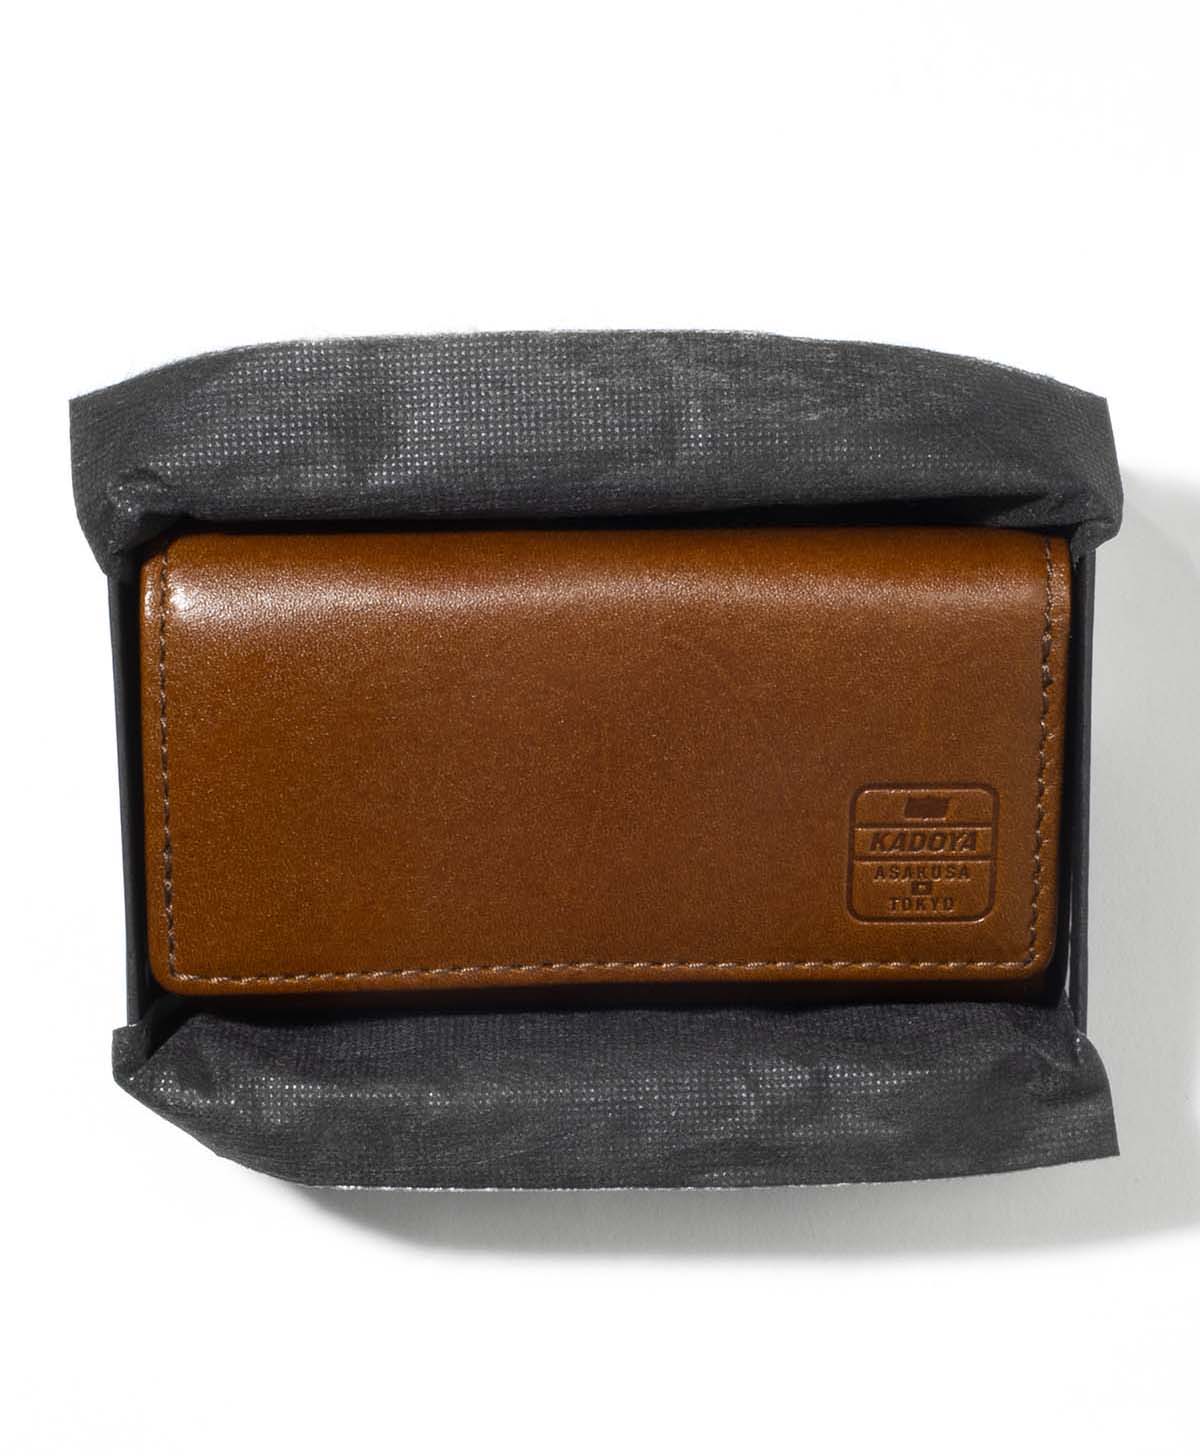 KEY CASE COMPACT WALLET / BROWN